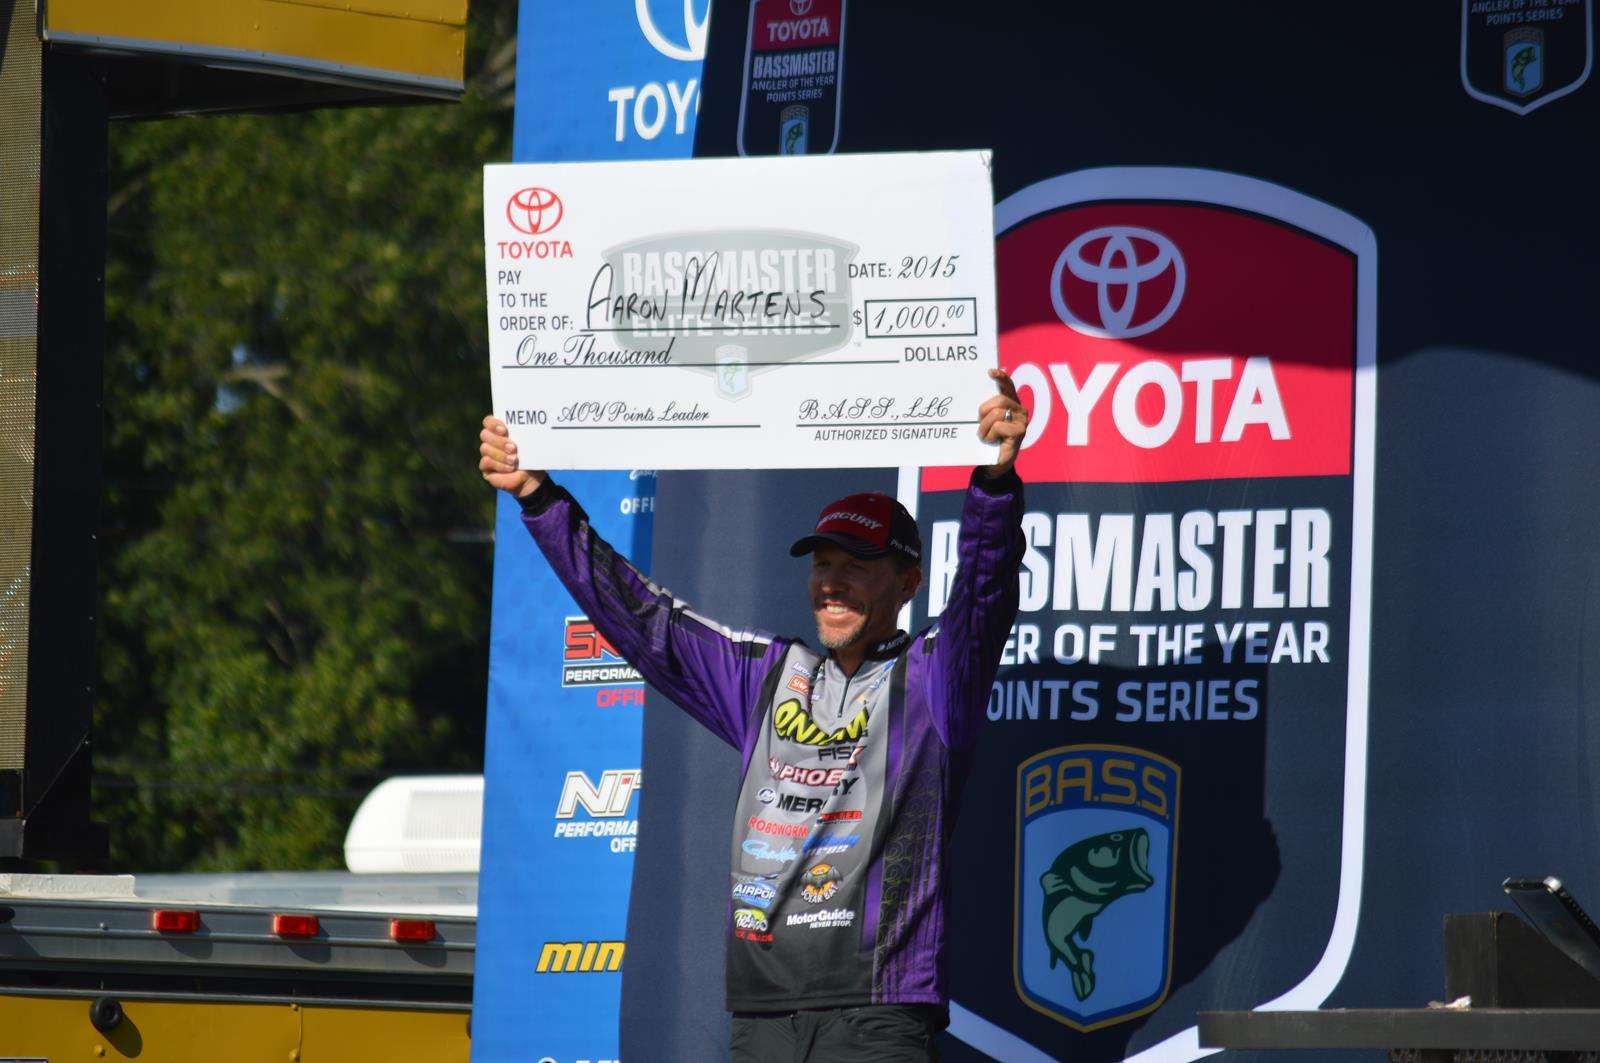 Martens also picked up a bonus from Toyota for leading in AOY points.